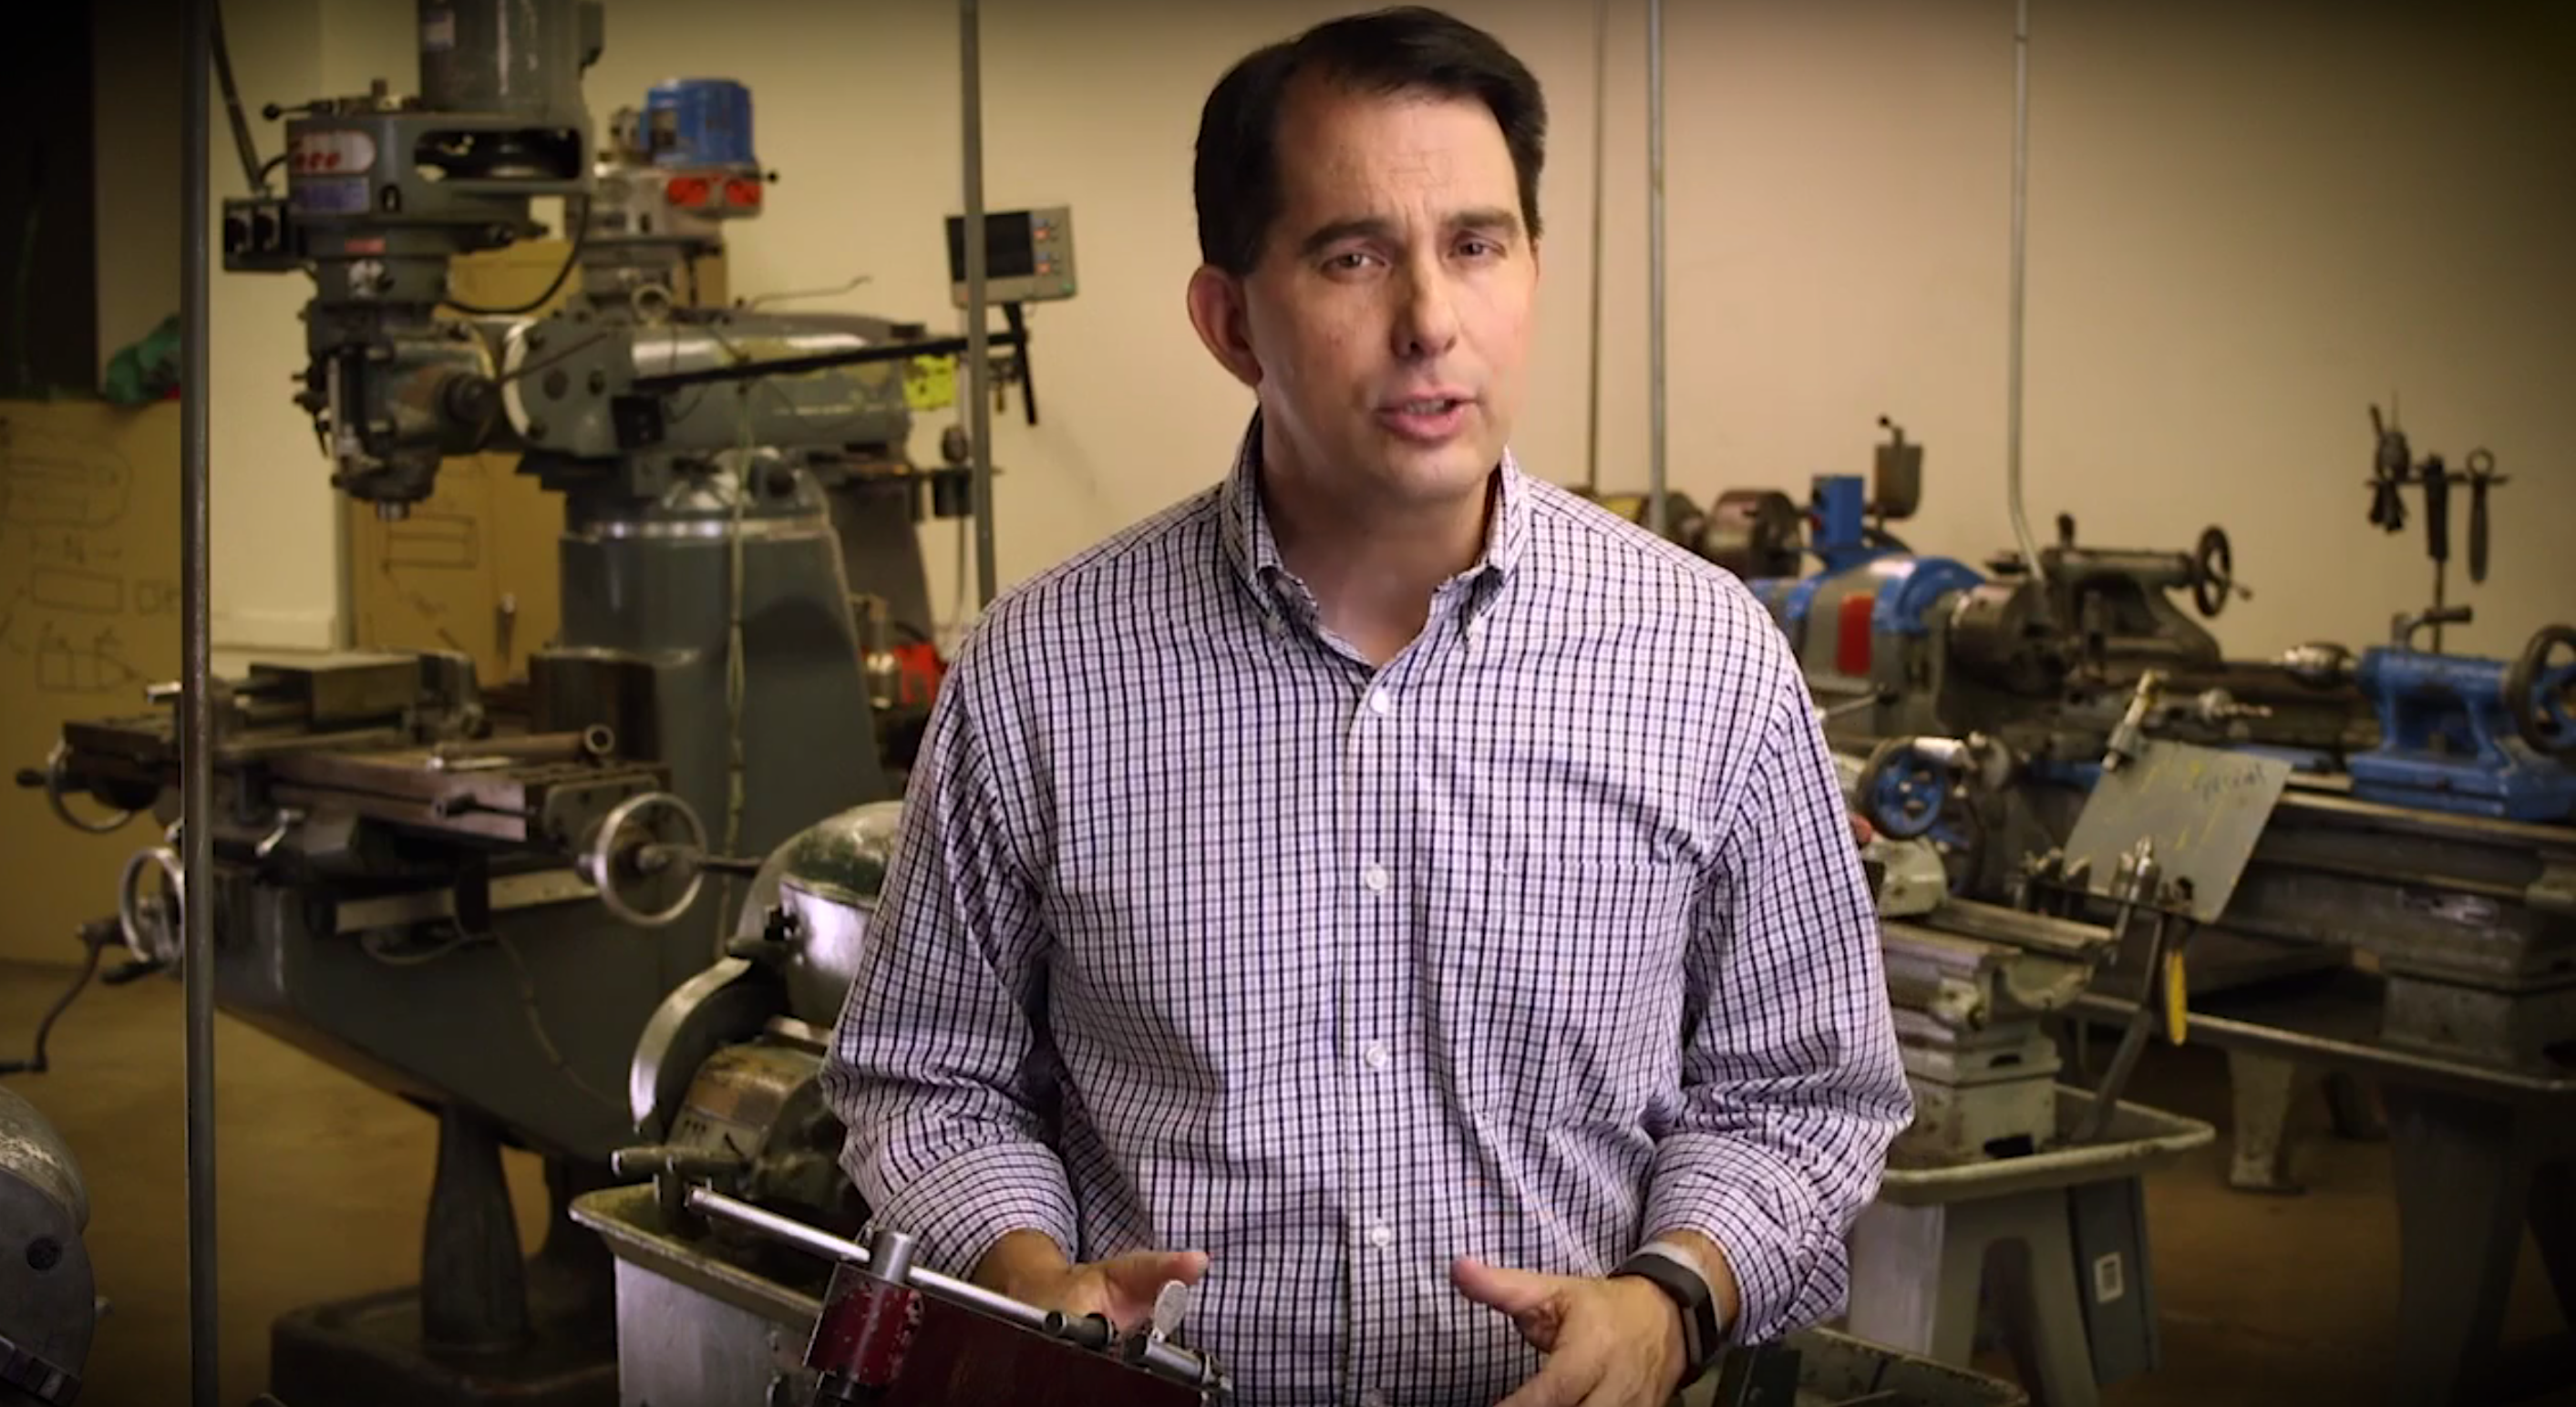 Walker Proposes Expanding Wisconsin’s Youth Apprenticeship Program